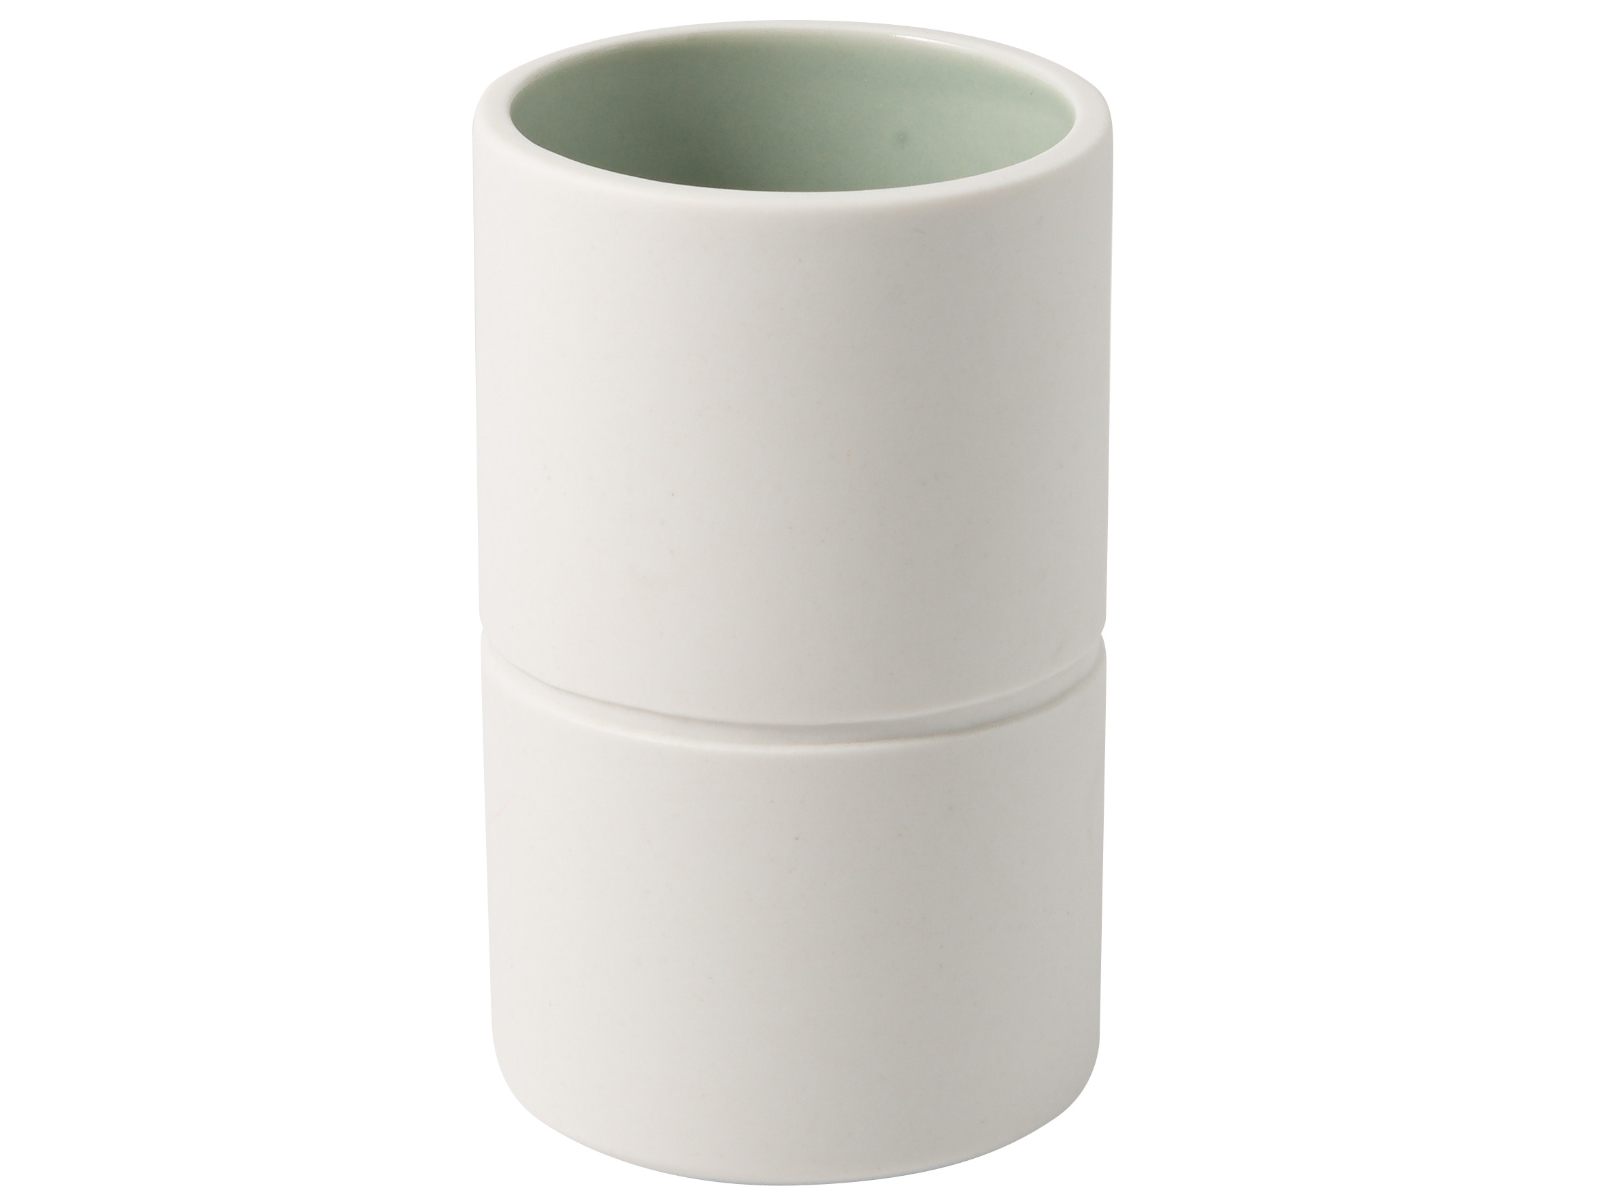 Villeroy & Boch it's my home Vase S mineral 6 x 10 cm